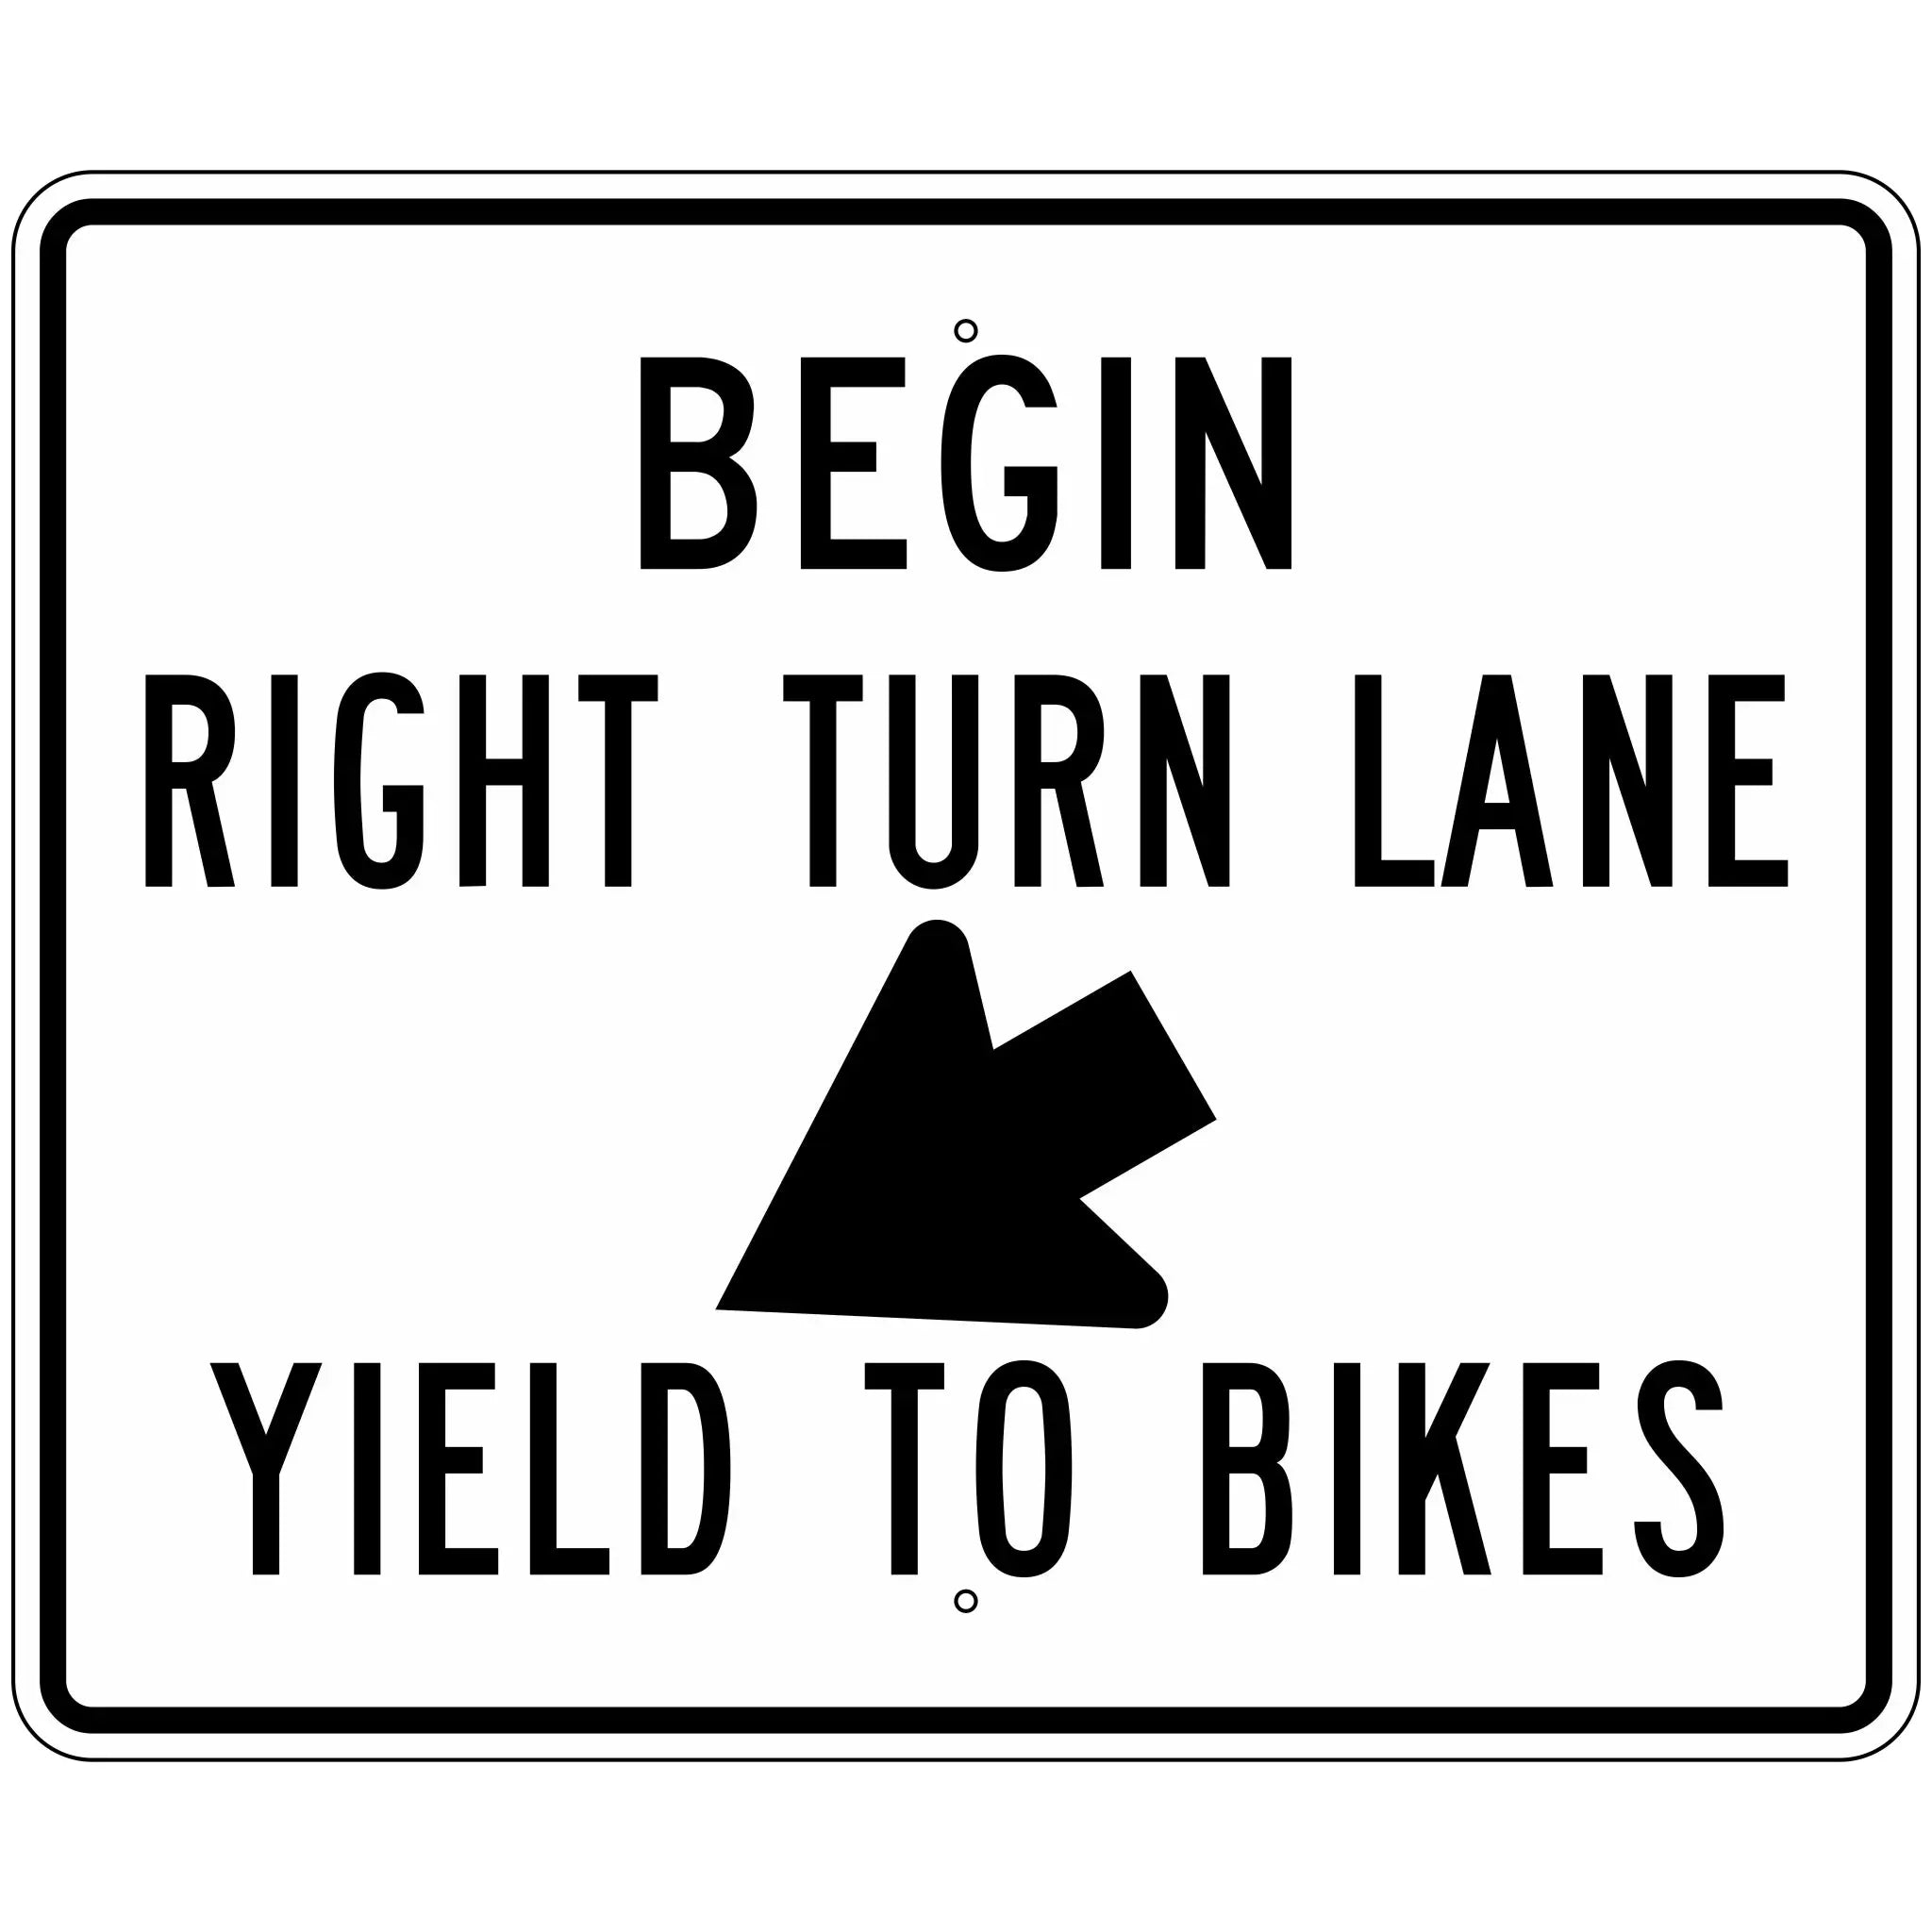 R4-4 Begin Right Turn Lane (With Arrow) Yield To Bikes Sign 36X30